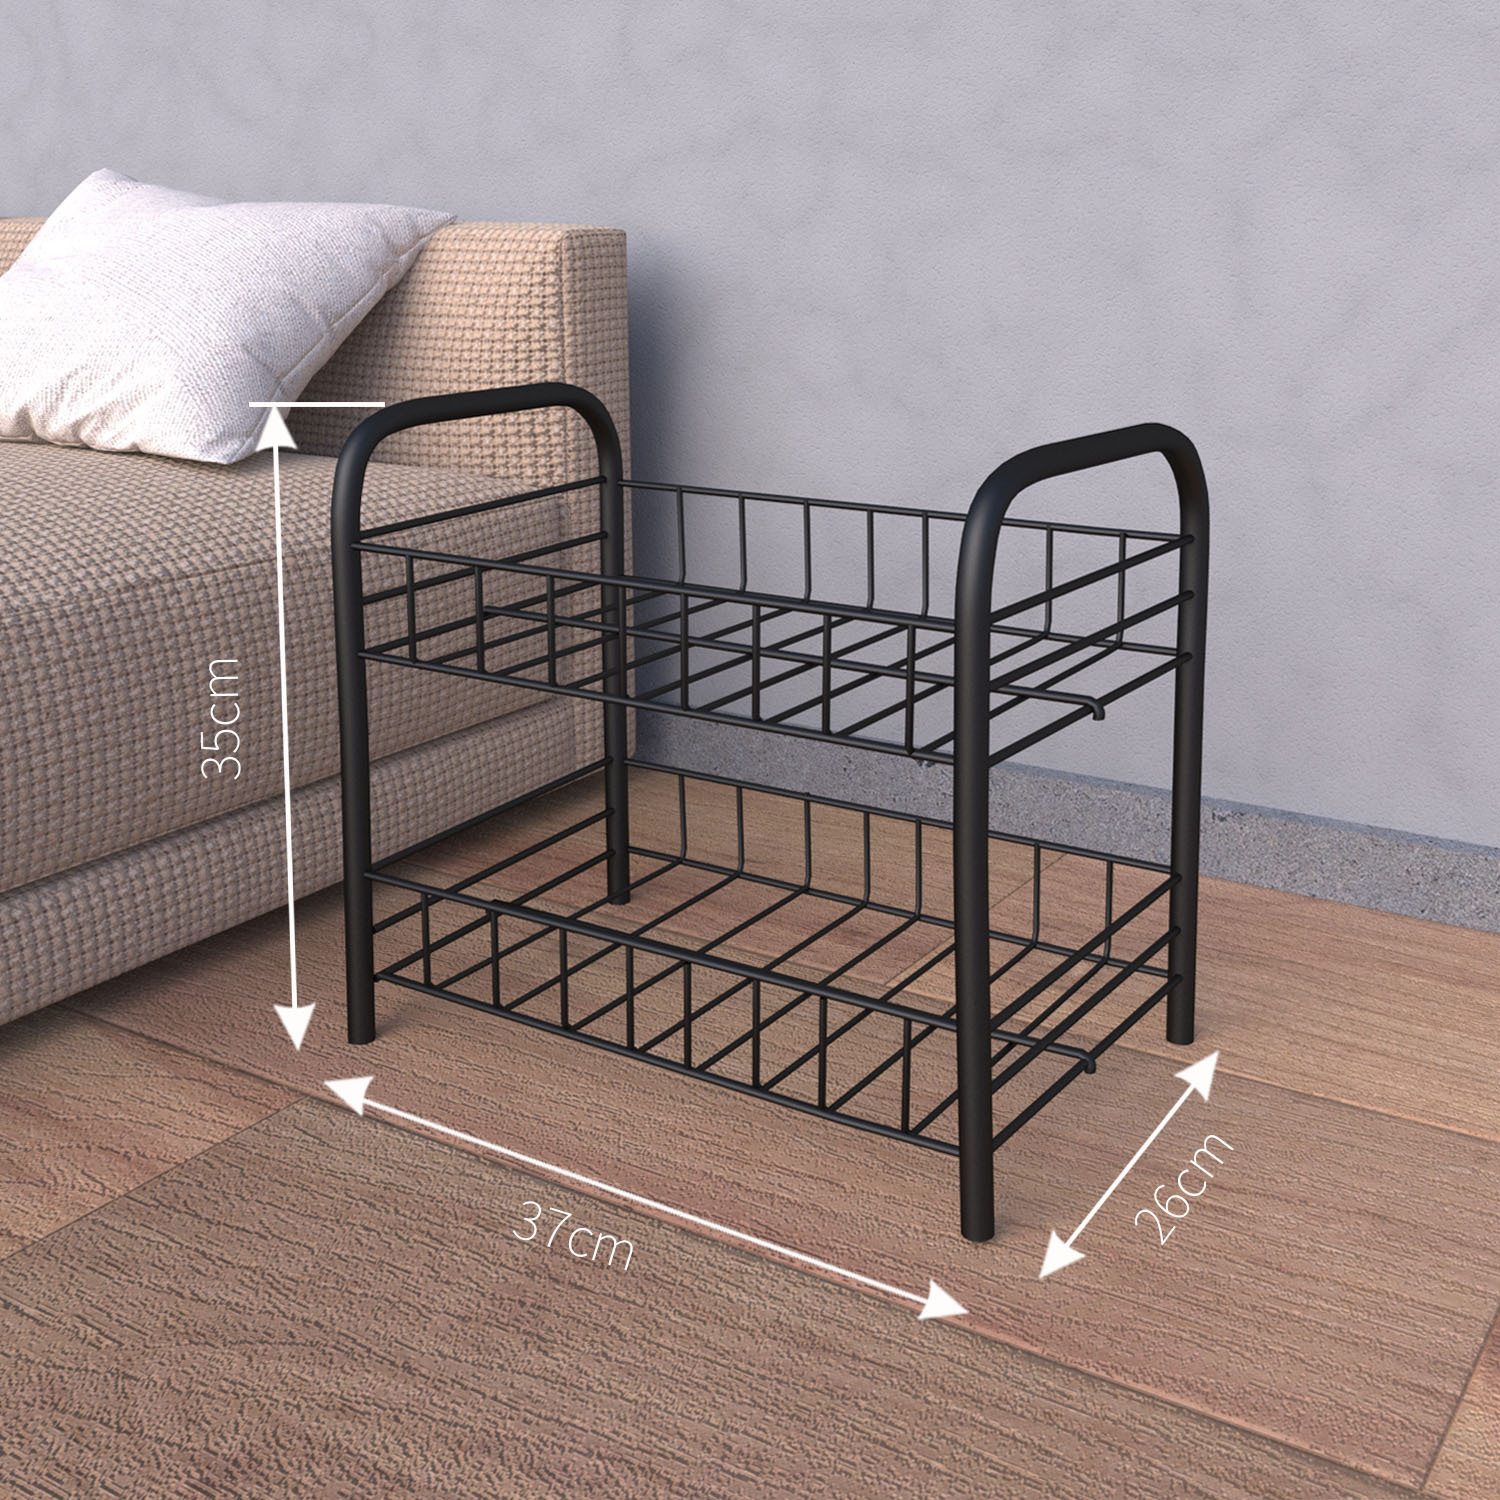 2 layers of black-iron wire rack